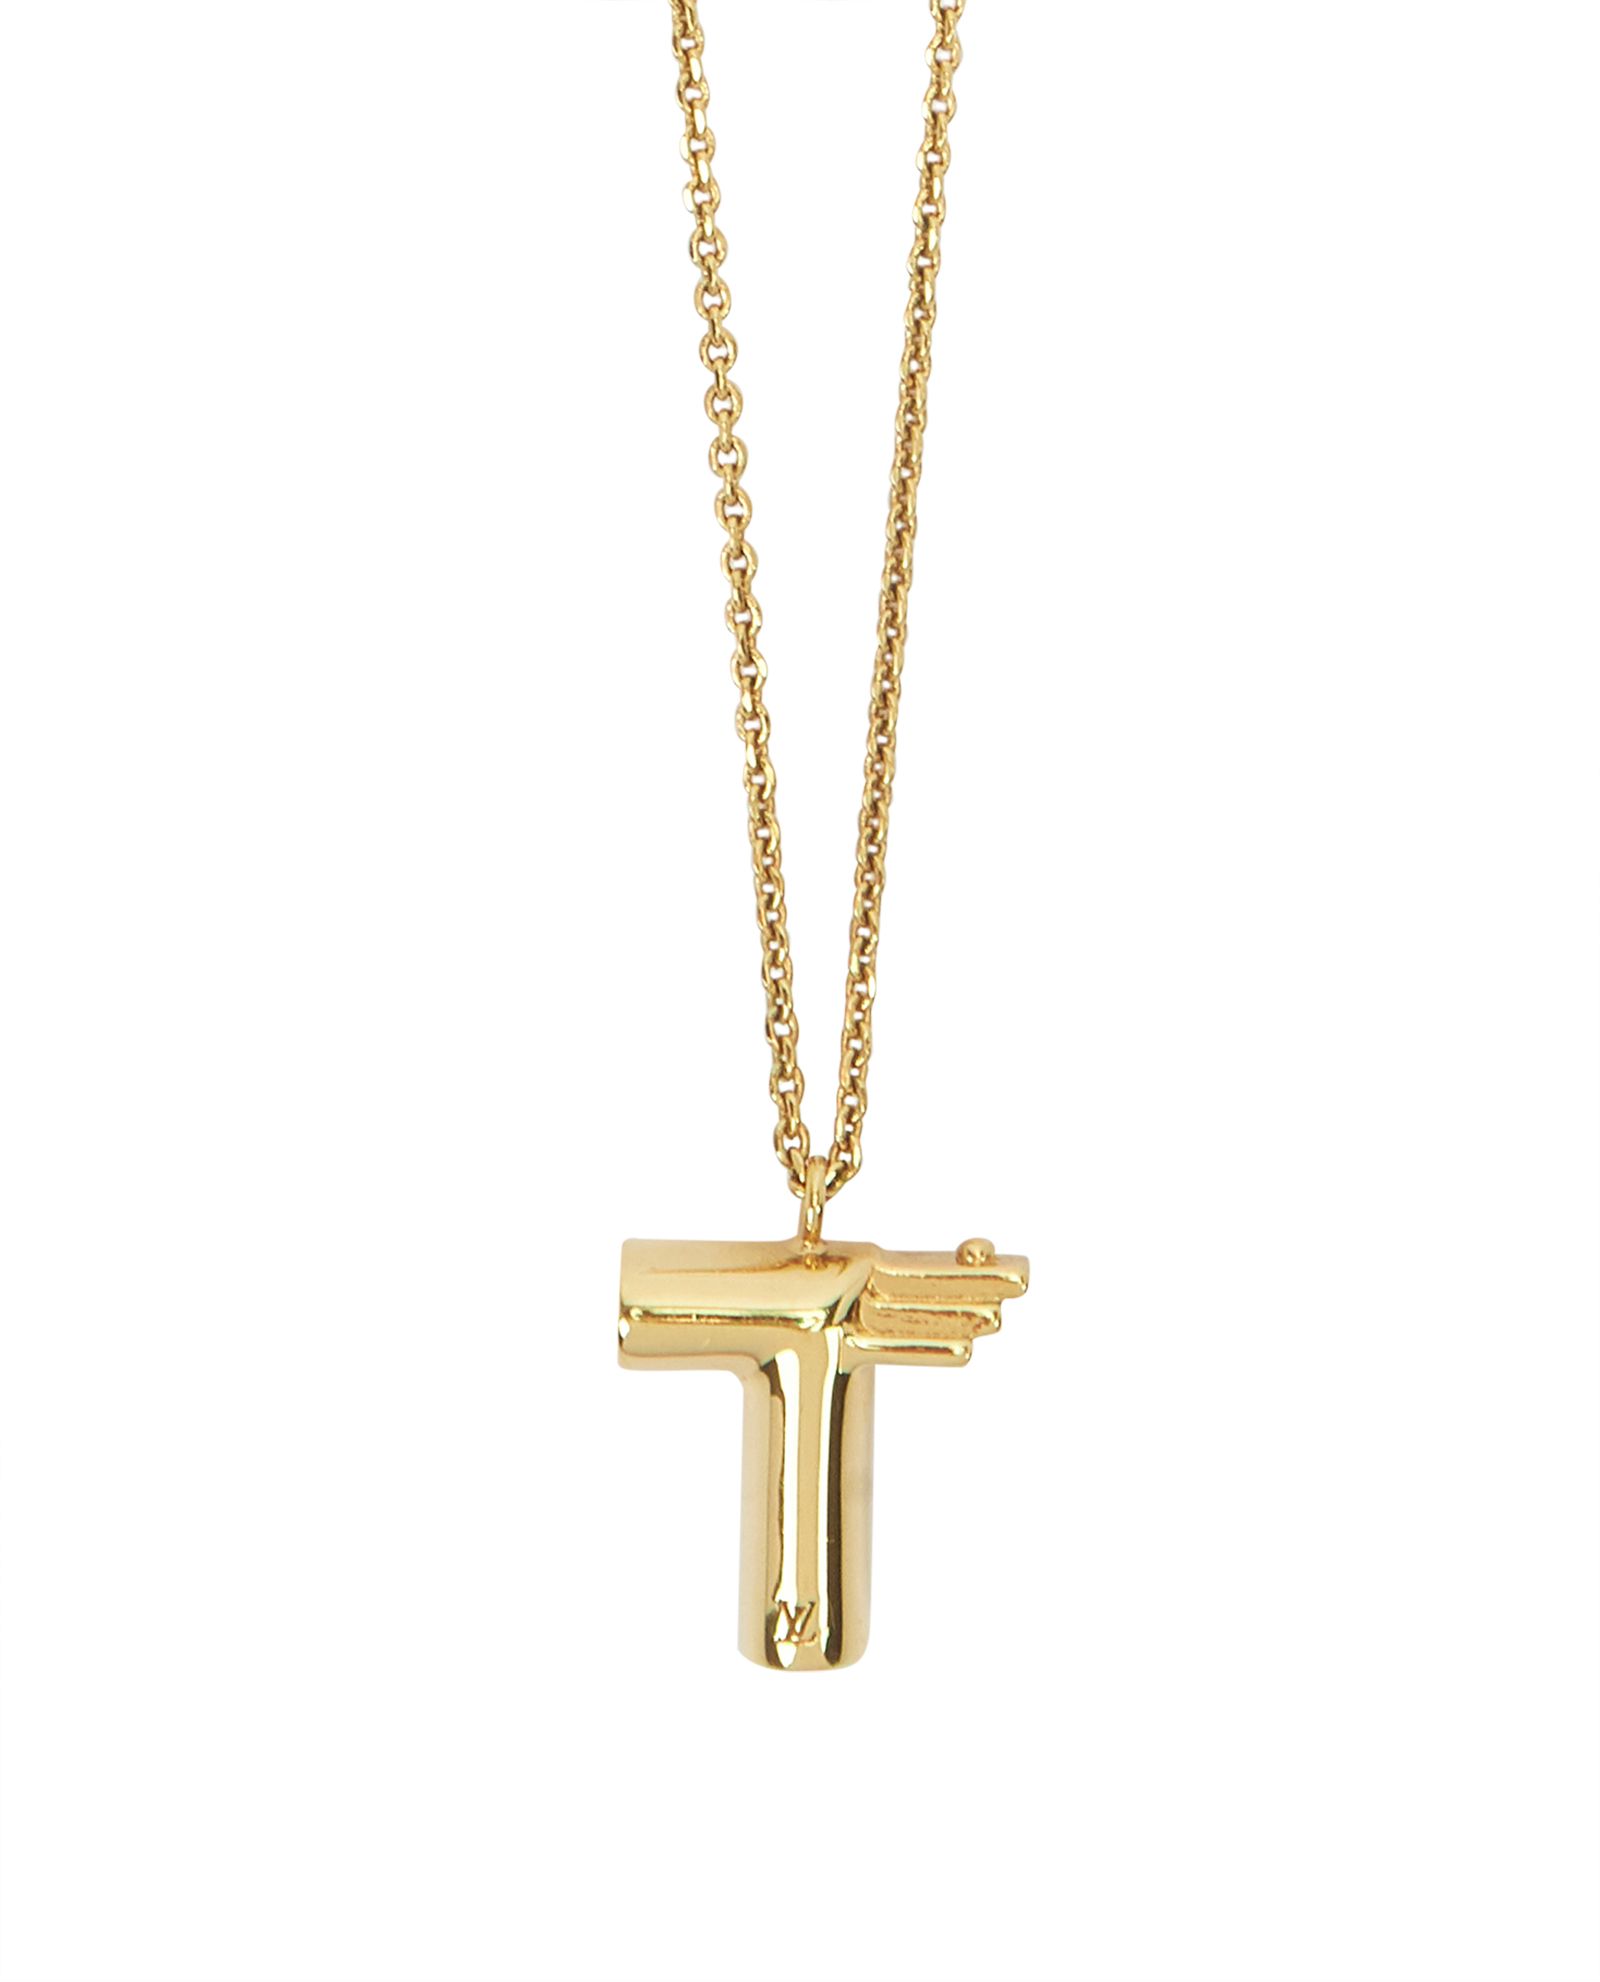 Shop Louis Vuitton 2020-21FW Squared Lv Gold Necklace (MP2692) by  Kanade_Japan